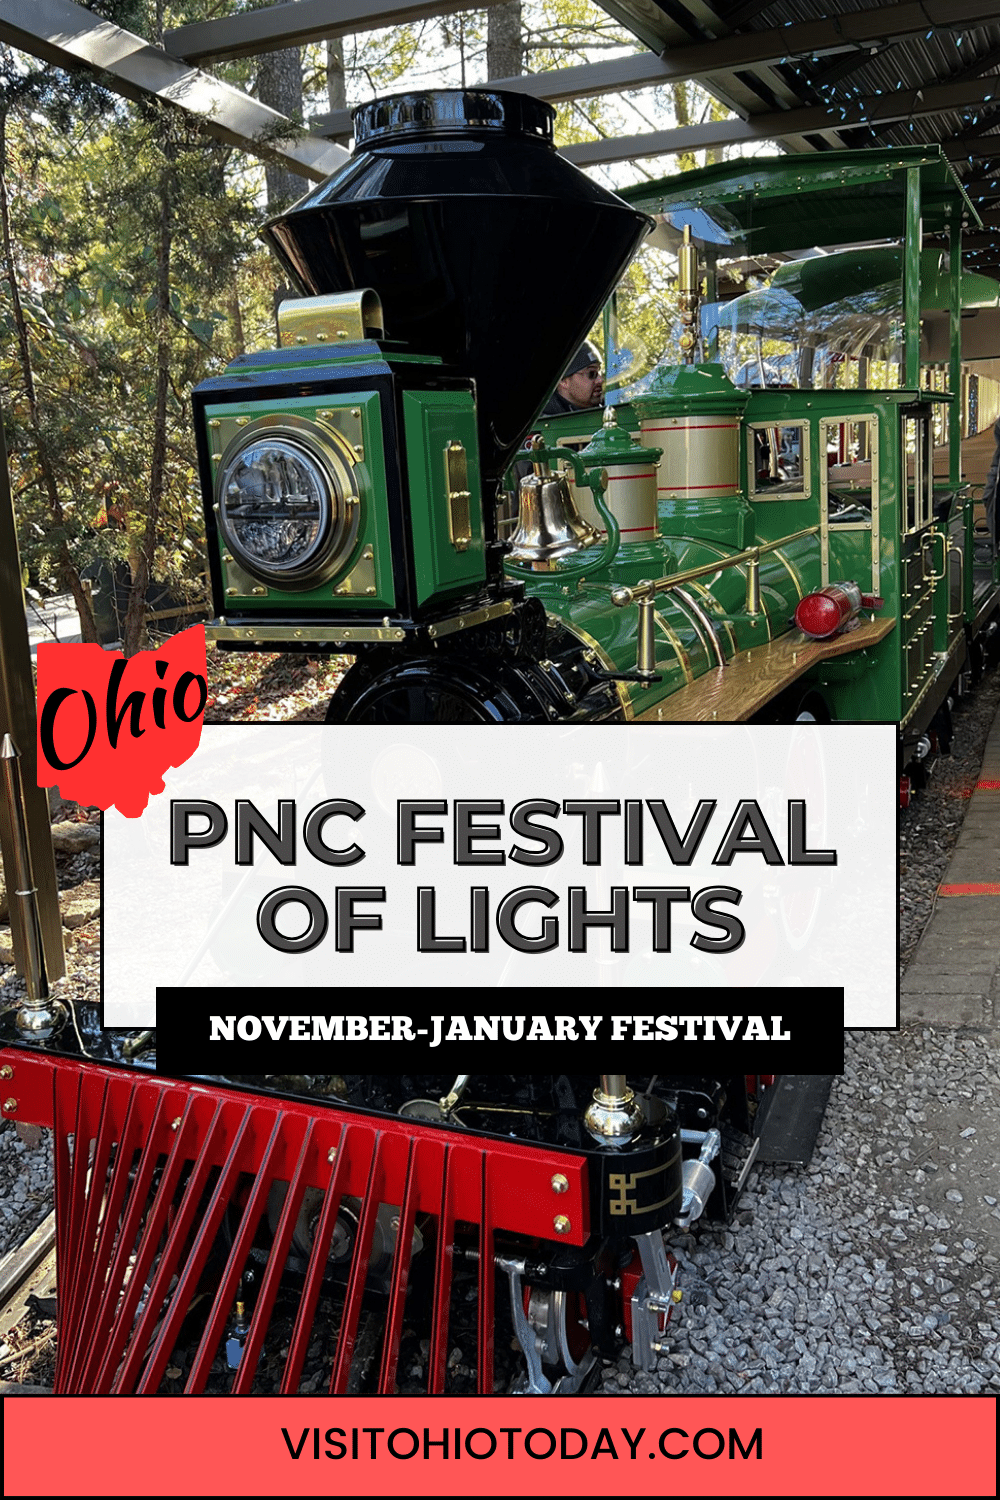 PNC Festival of Lights is at Cincinnati Zoo and Botanical Garden from mid-November to early January. A stunning light show for the whole family to enjoy!